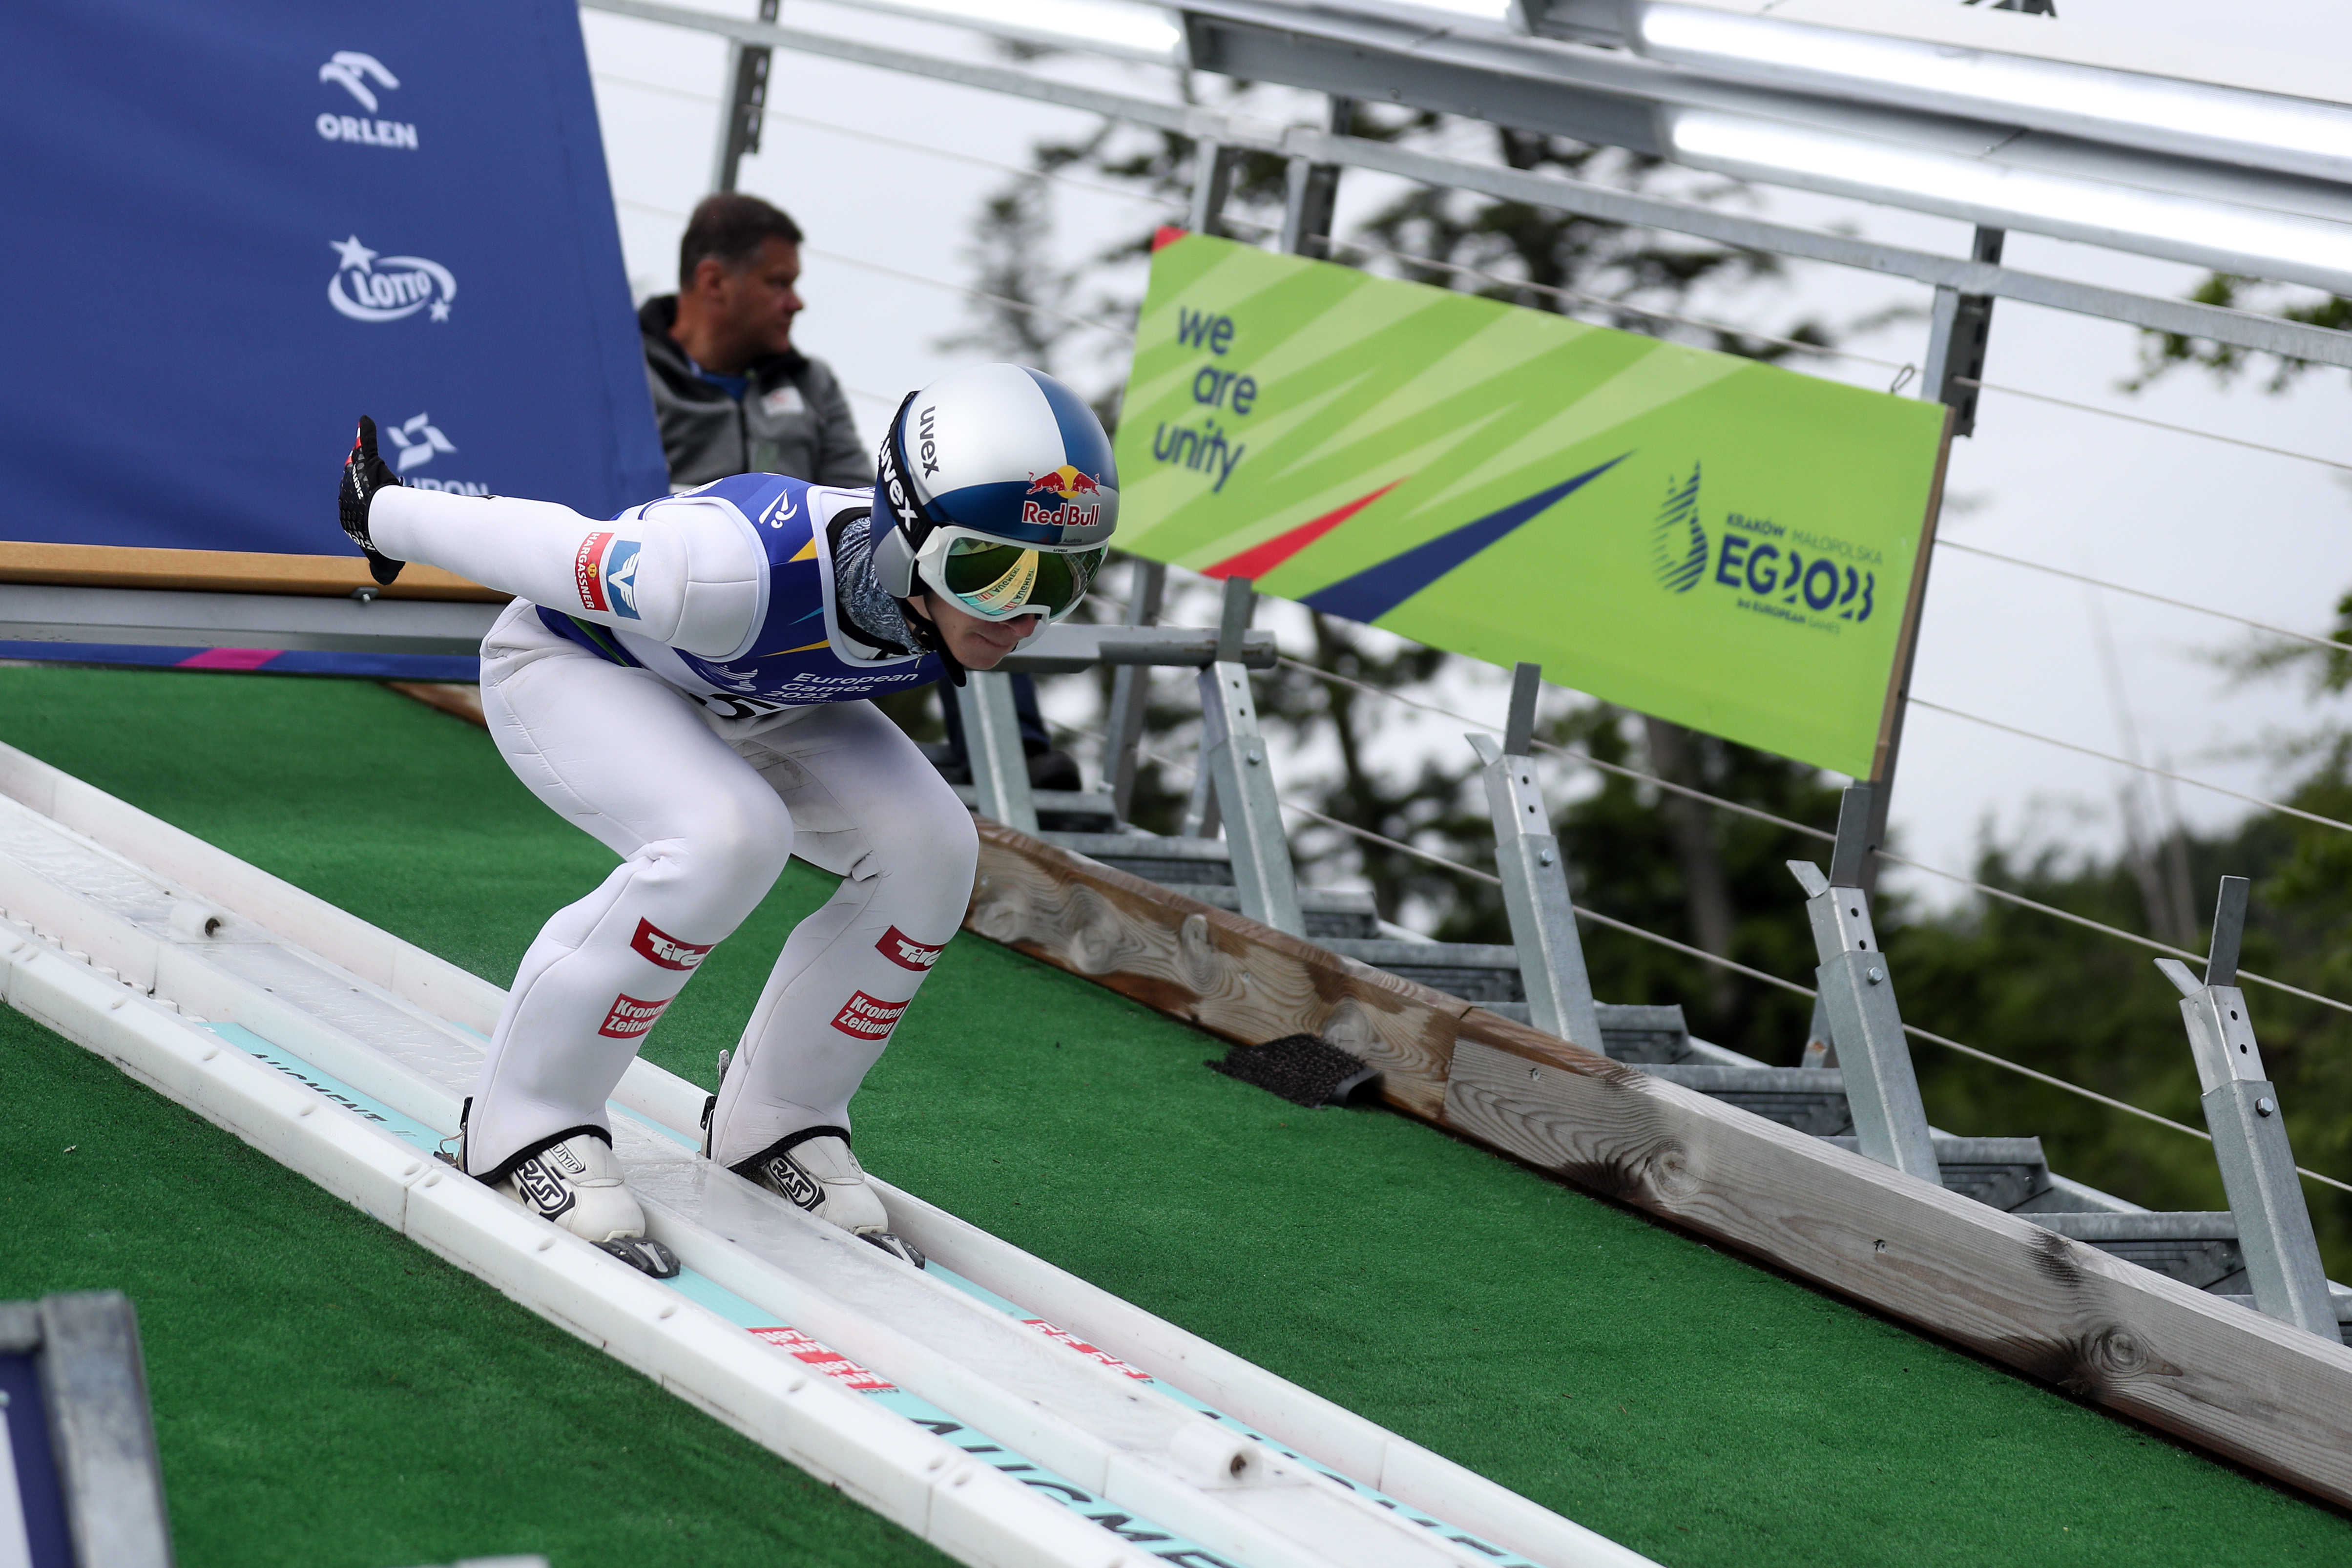 Men’s individual ski jumping competition on the Średnia Krokiew jumping hill